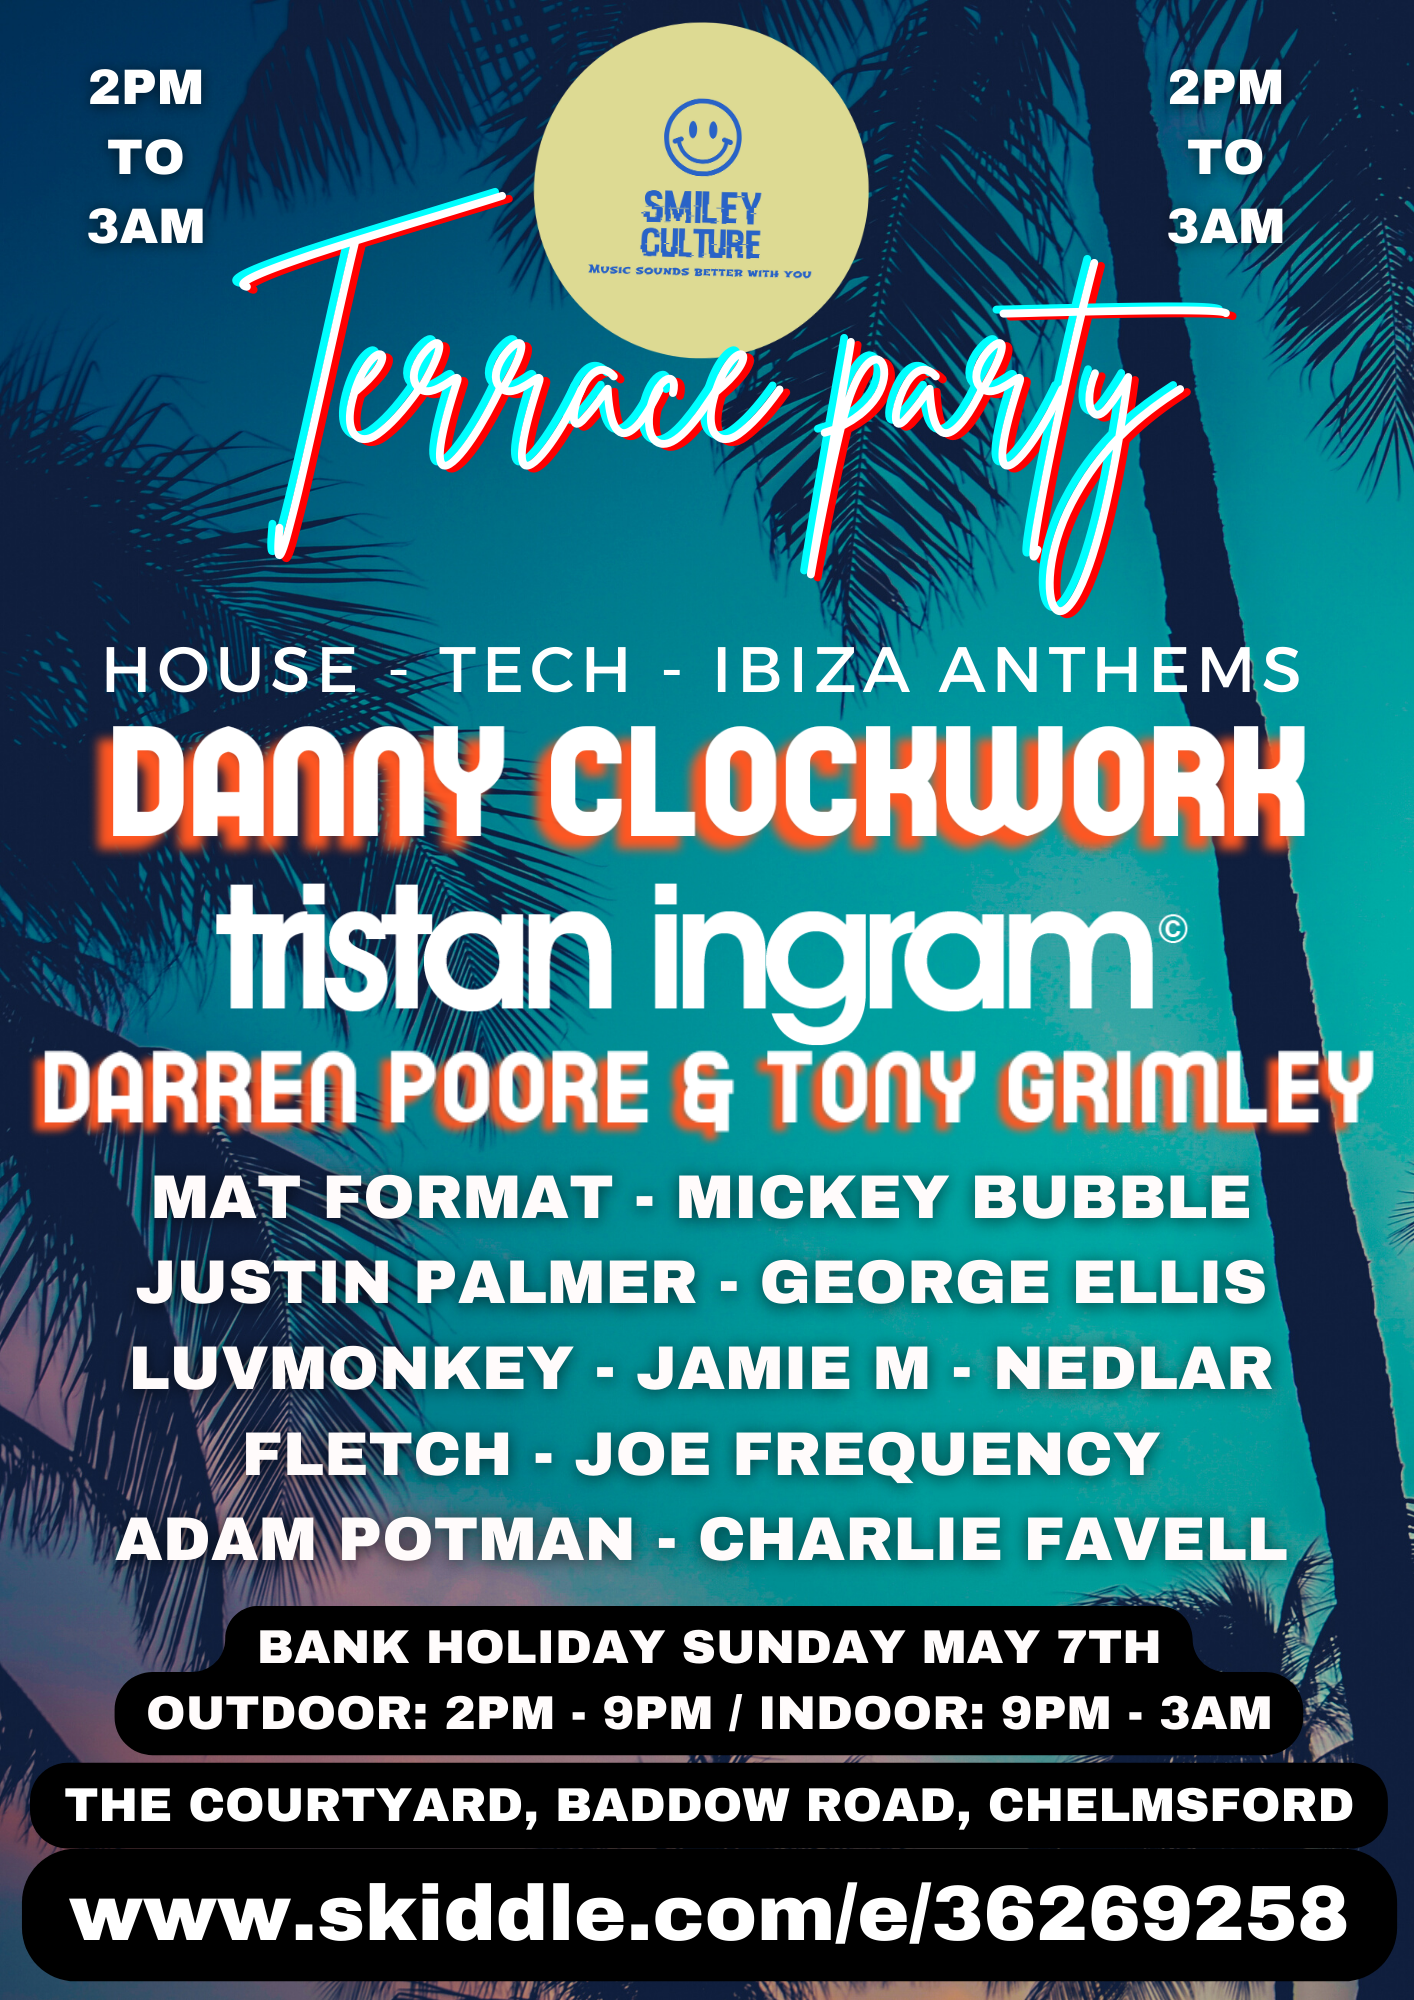 Smiley Culture presents: The Terrace Party - Página frontal